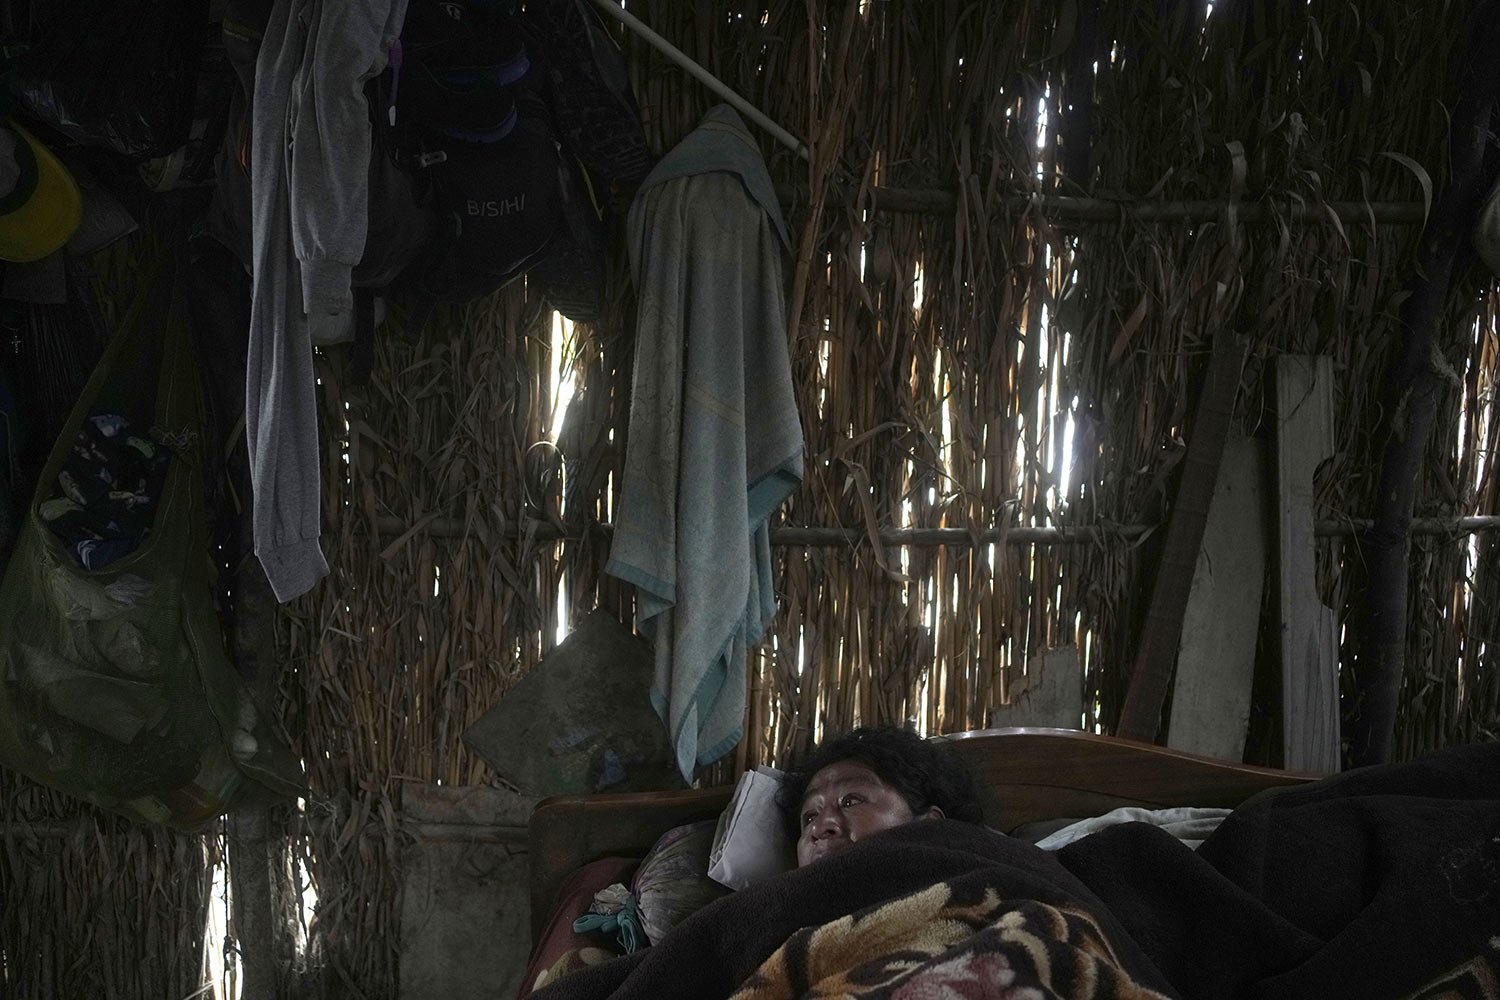  Dengue patients Maria Galan, 47, lies in her bed at the San Pablo low-income neighborhood in Piura, Peru, June 4, 2023. Dengue, a viral disease transmitted by a mosquito, causes flu-like symptoms, such as muscle pain and fever. (AP Photo/Martin Meji